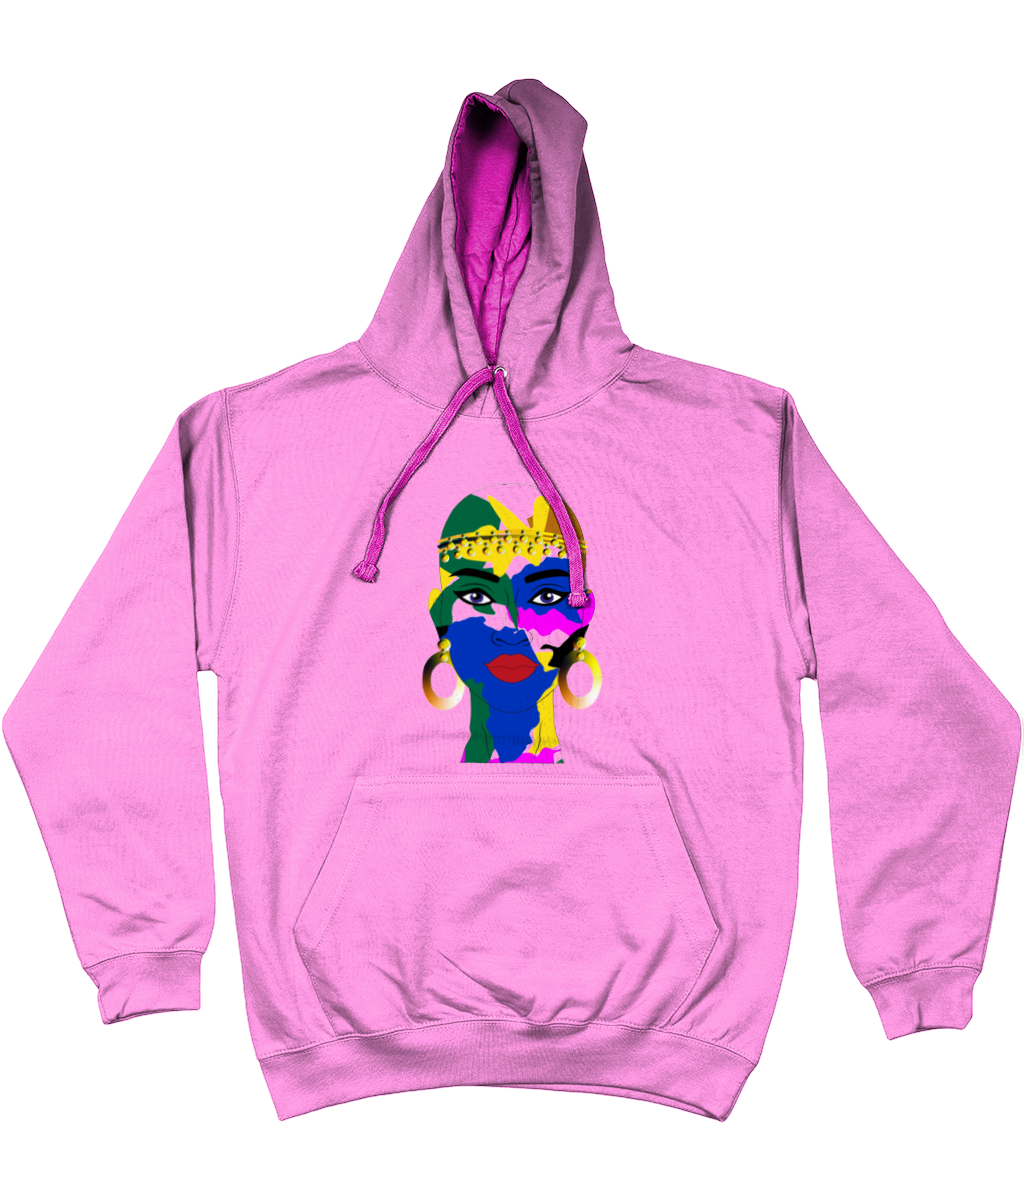 AfriBix Camo Warrior Unisex Hoodie with a contrast hood and string